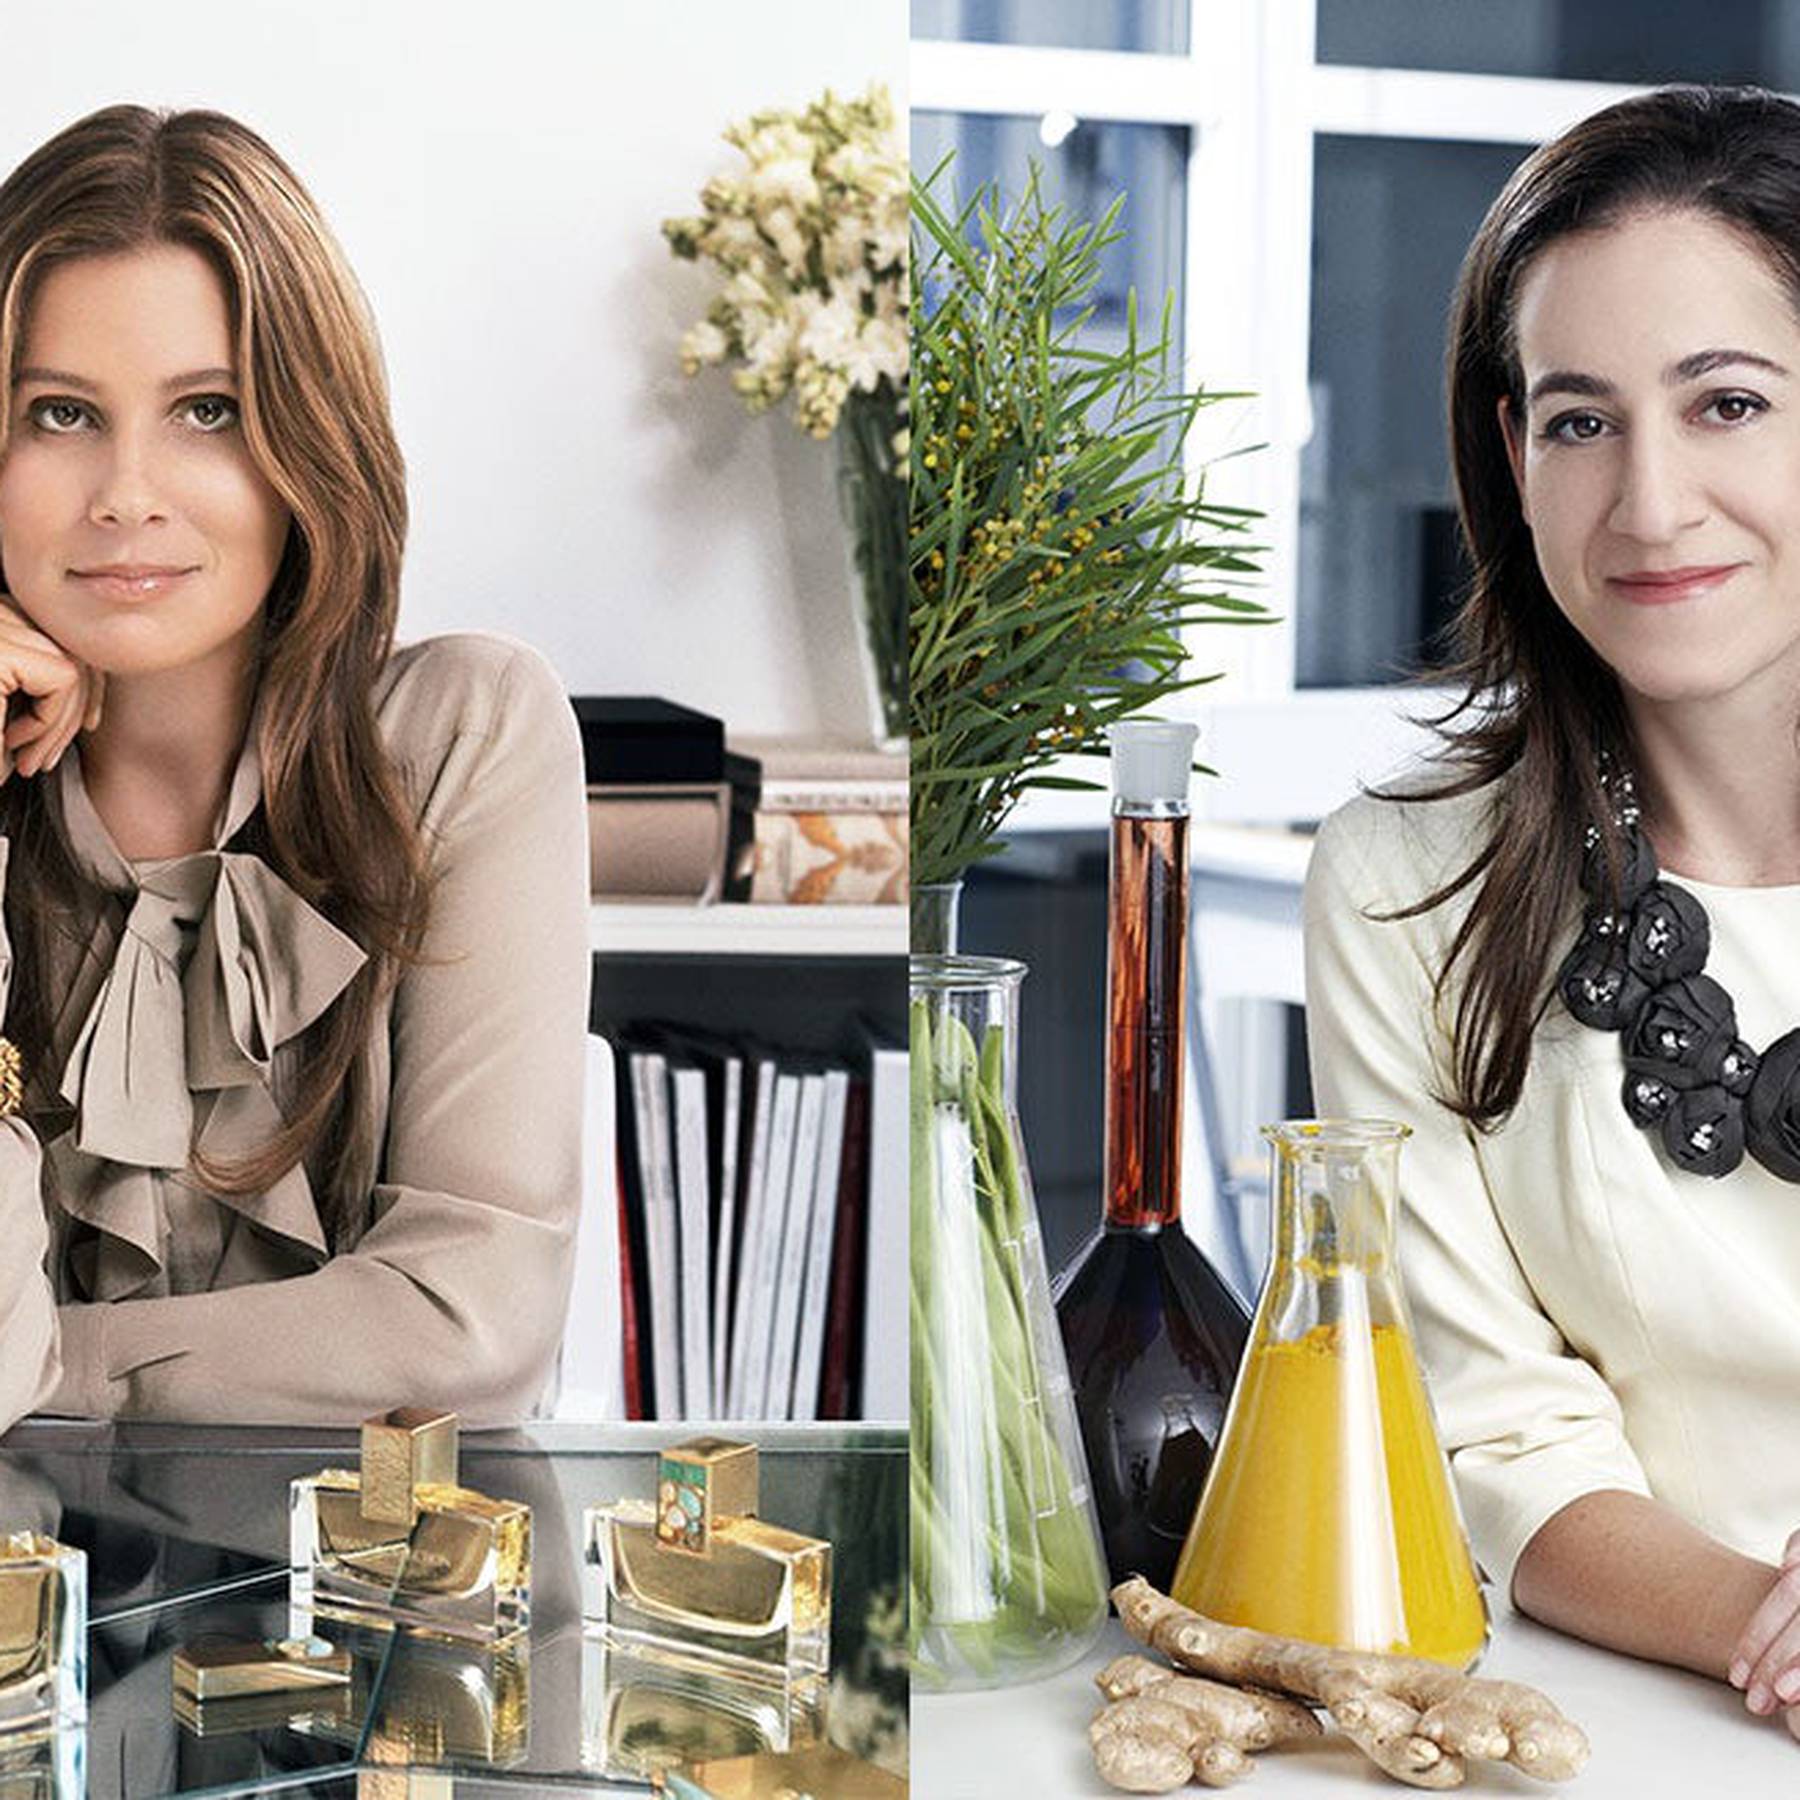 More Than Estée Lauder's Granddaughter — How Aerin Lauder Built Her Own  Lifestyle Brand Into a 10-Year-Old Force